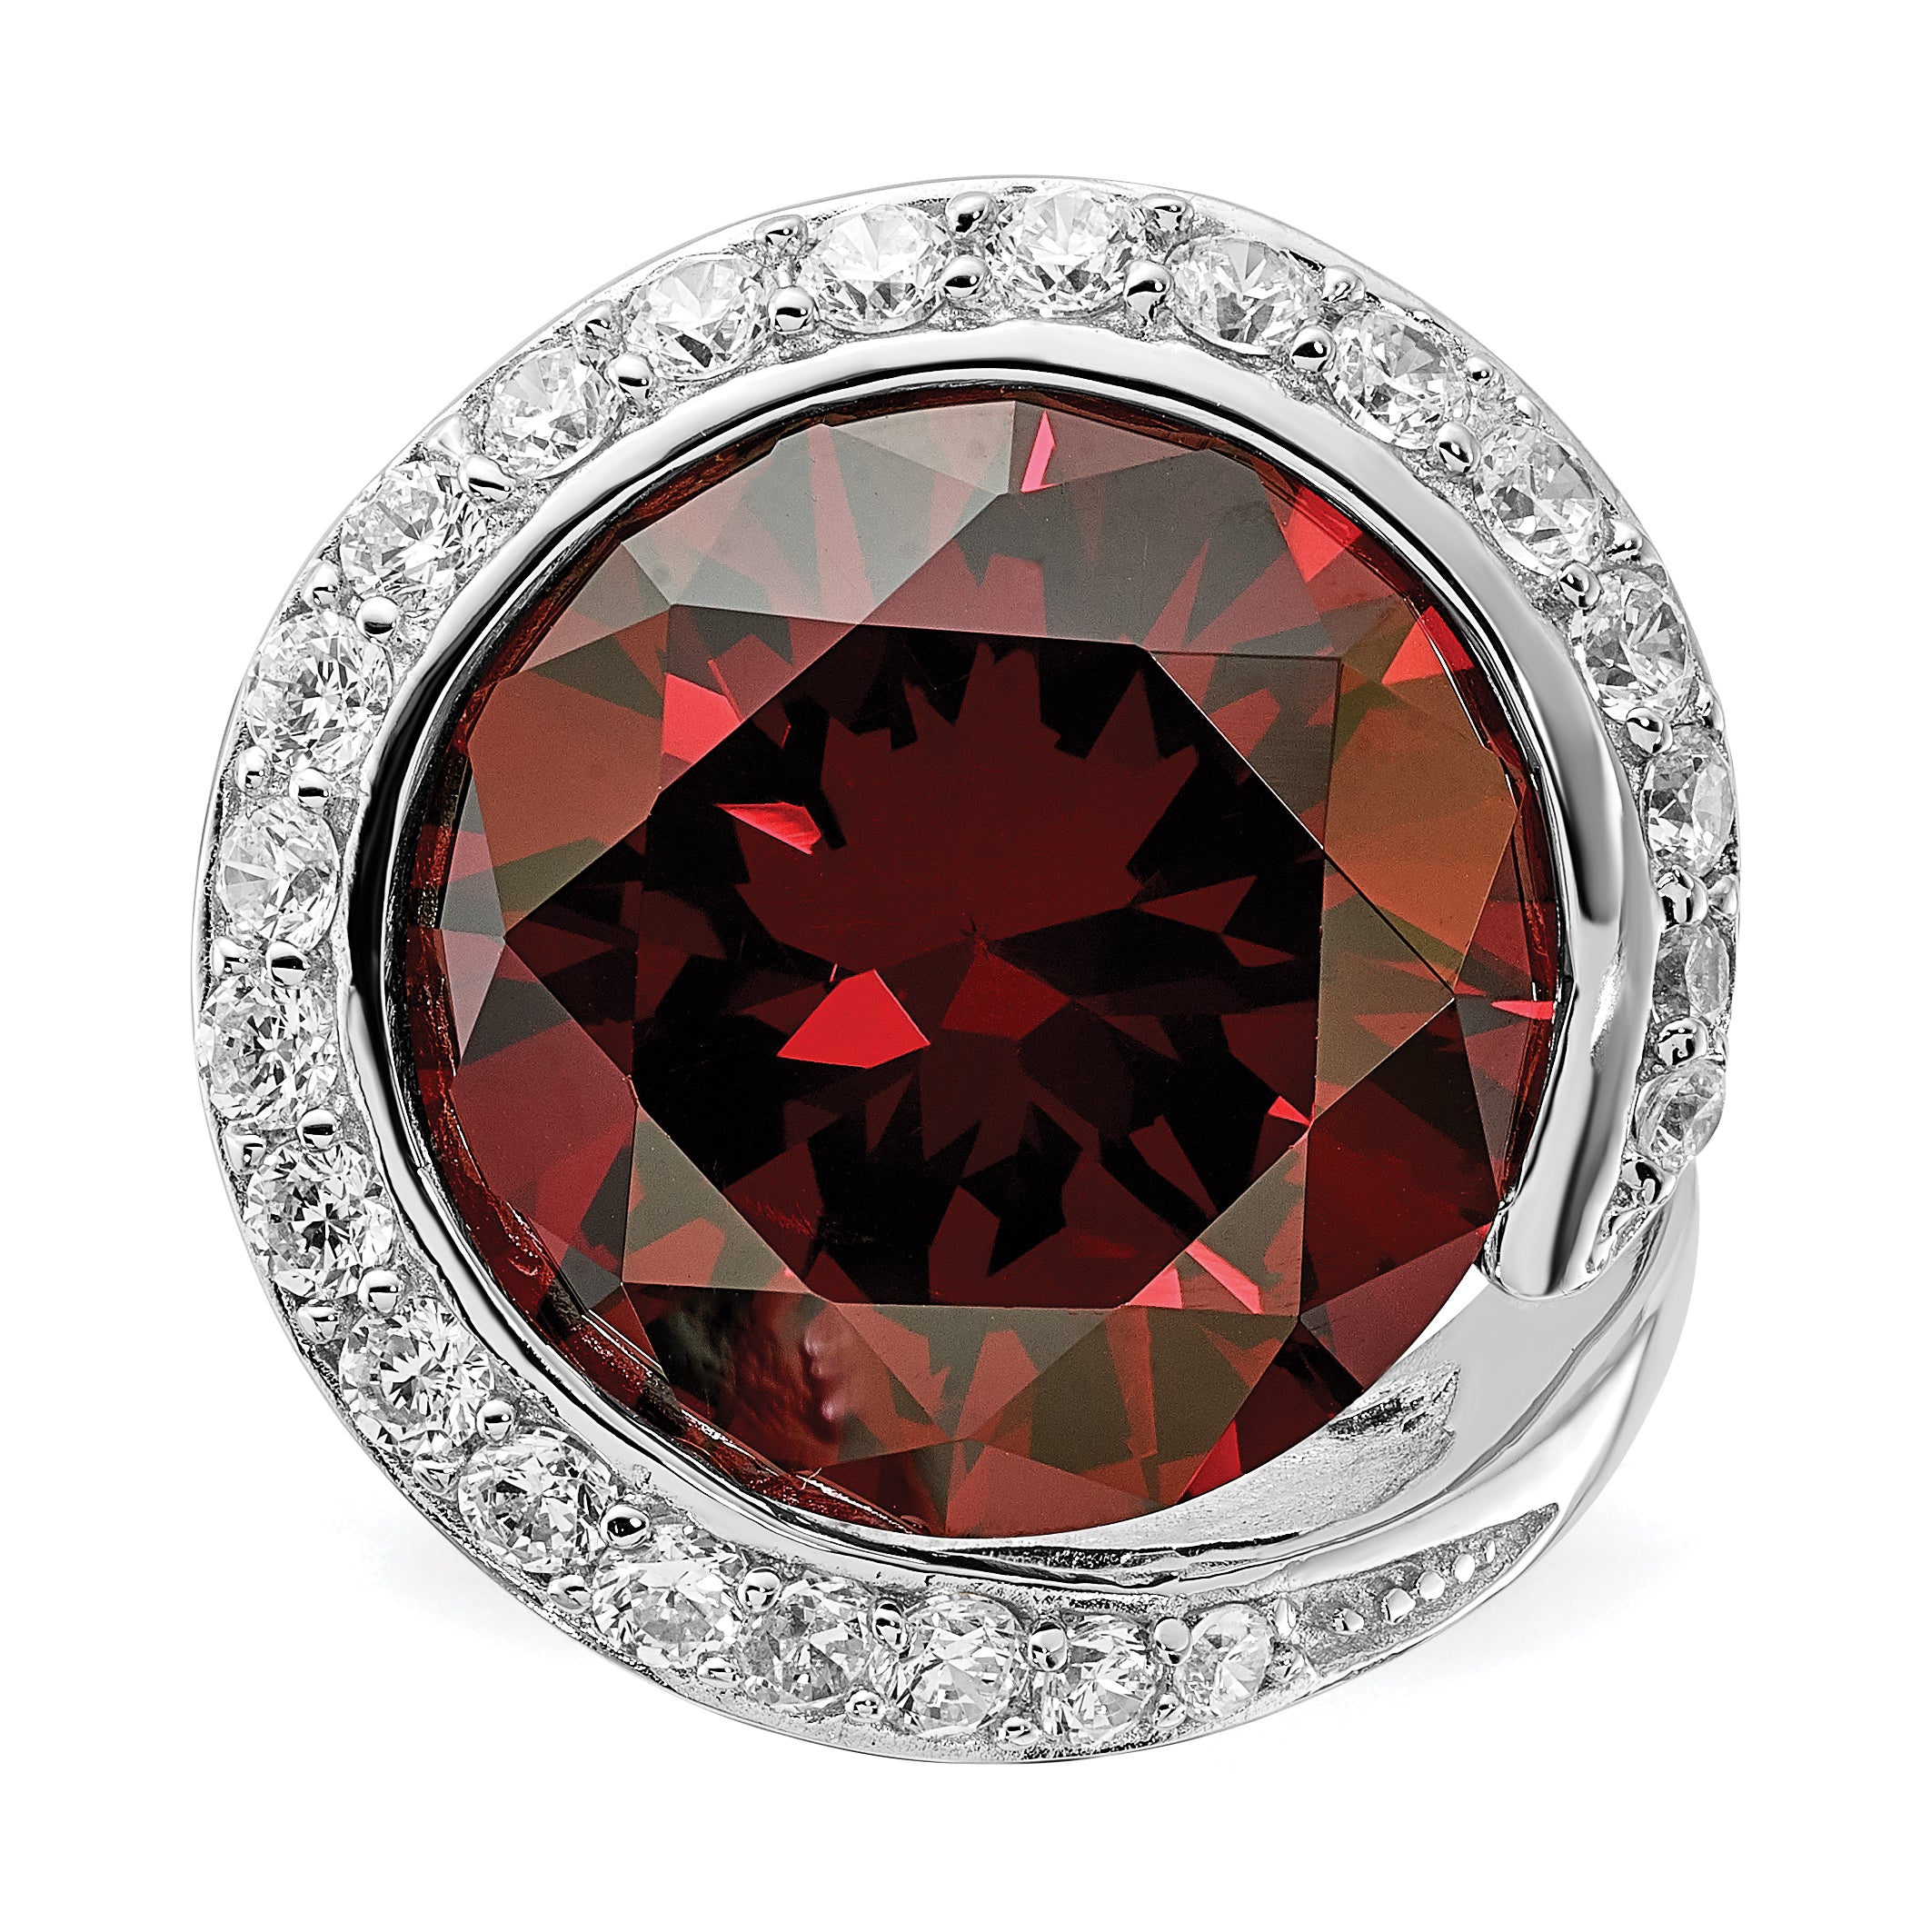 Sterling Silver Polished Red & Clear CZ Ring